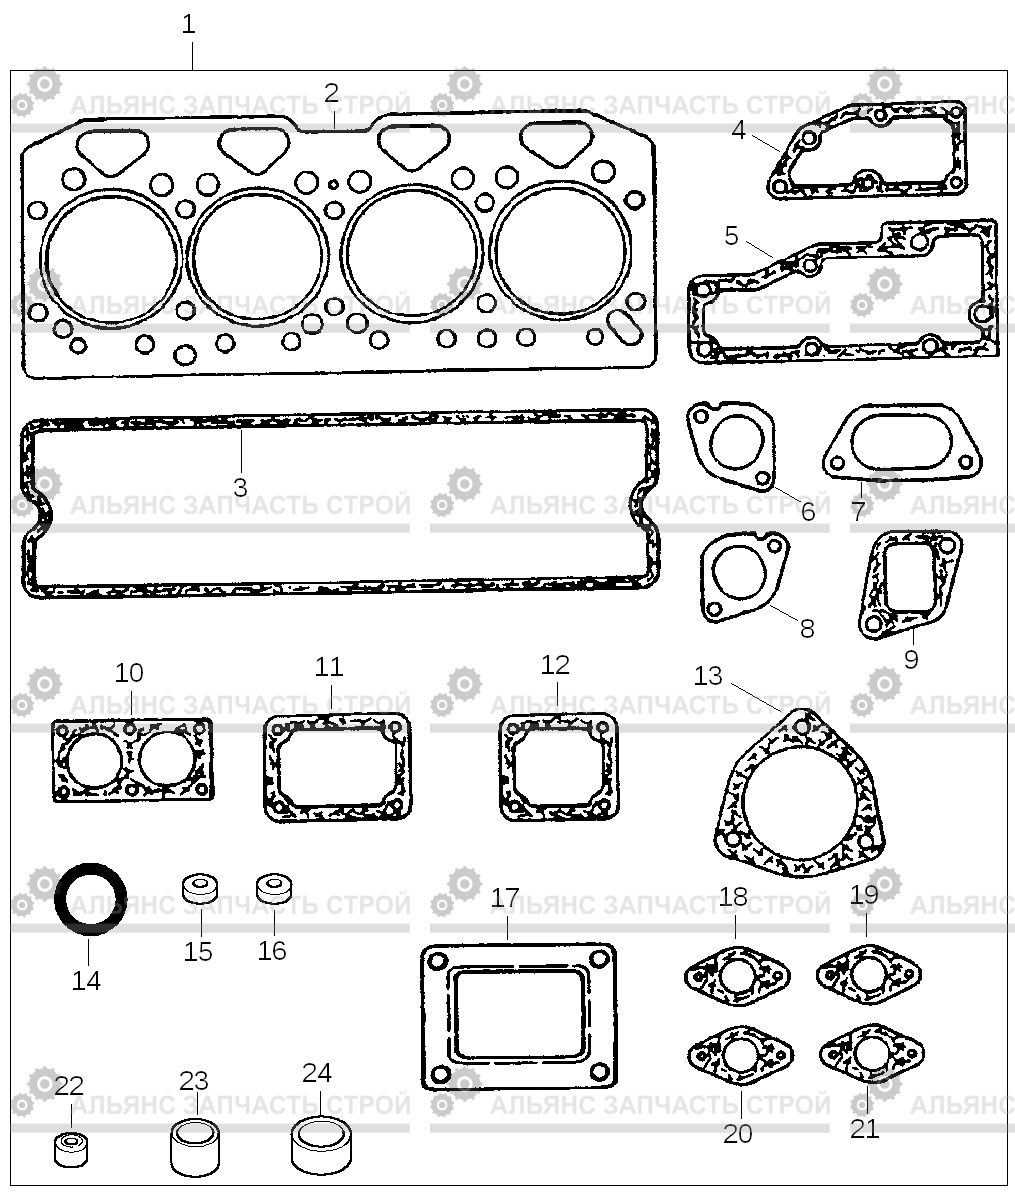 9380 JOINTS & GASKETS-TOP SERVICE KIT HDF35/45A, Hyundai